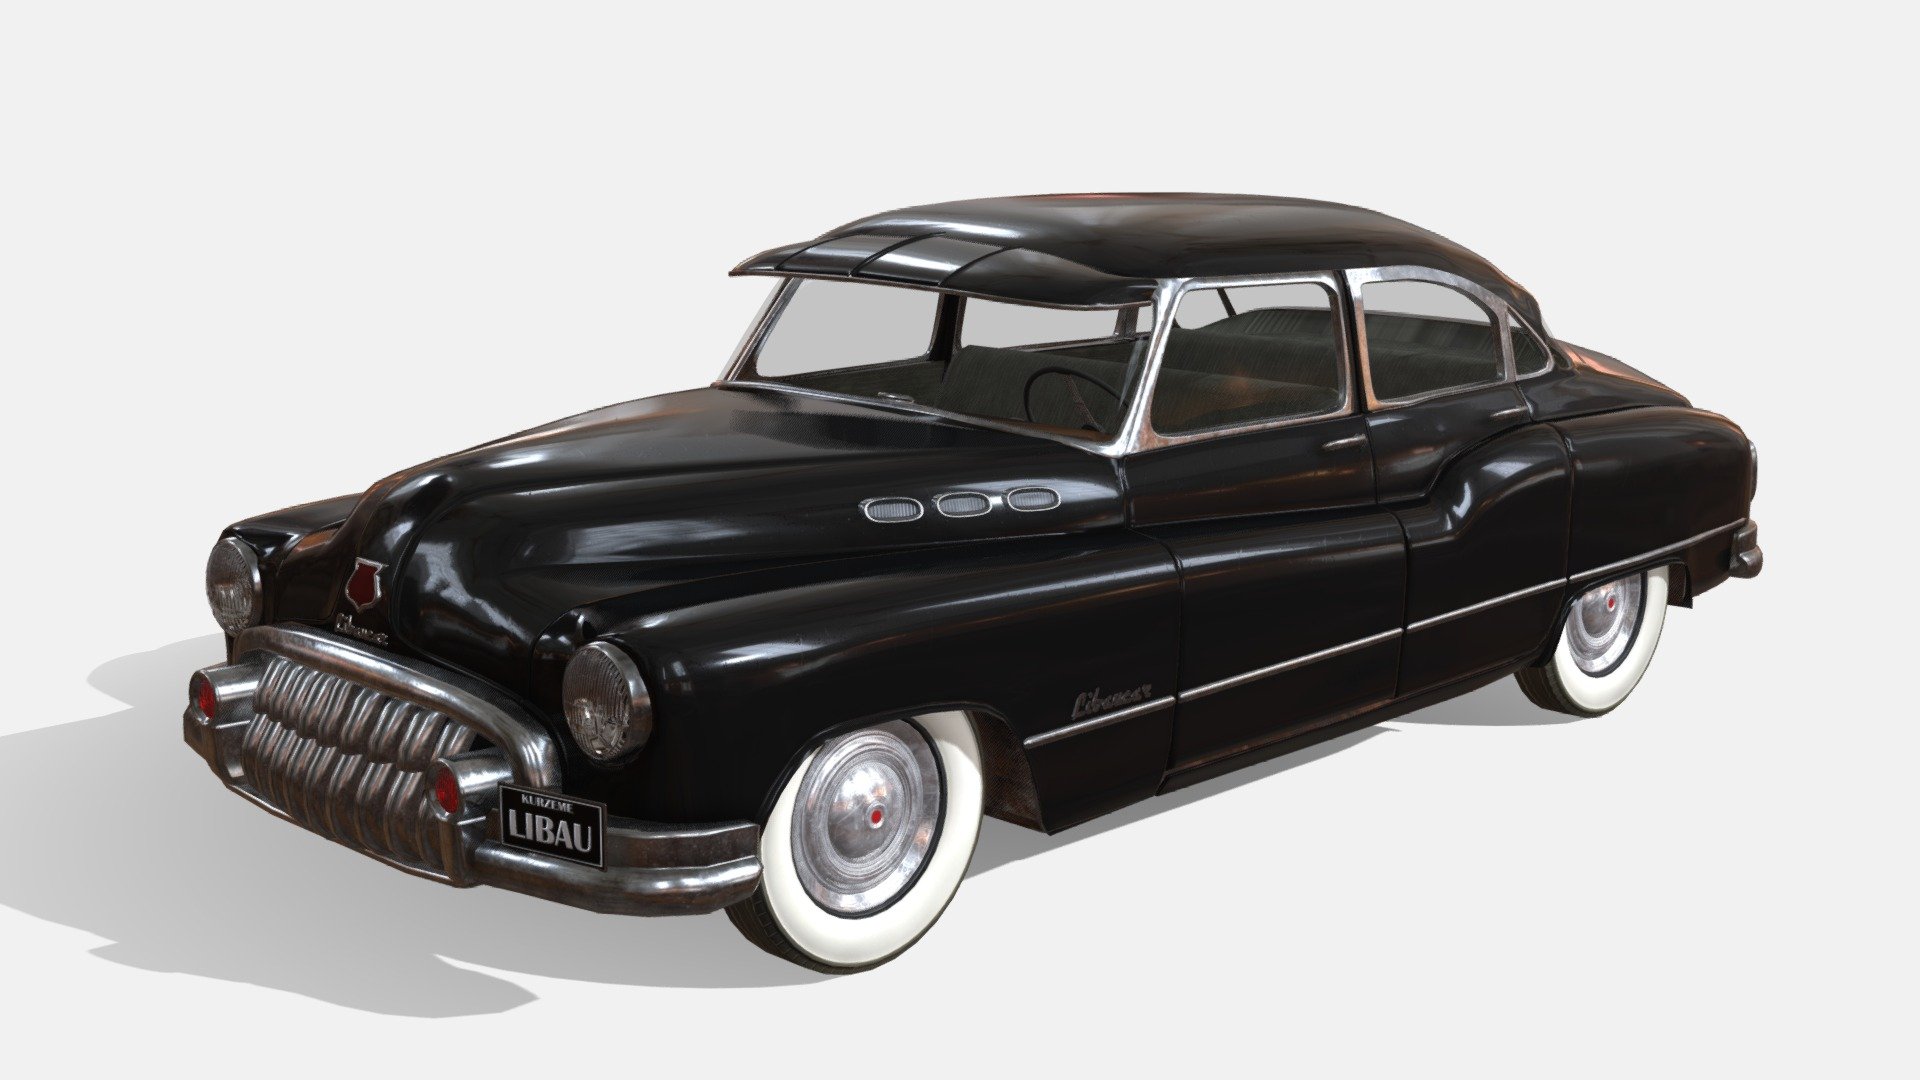 Based on Buick, i followed the scan by Renafox as a rough guide for the shape. 
Download includes all texture files, fbx and blend version 3d model